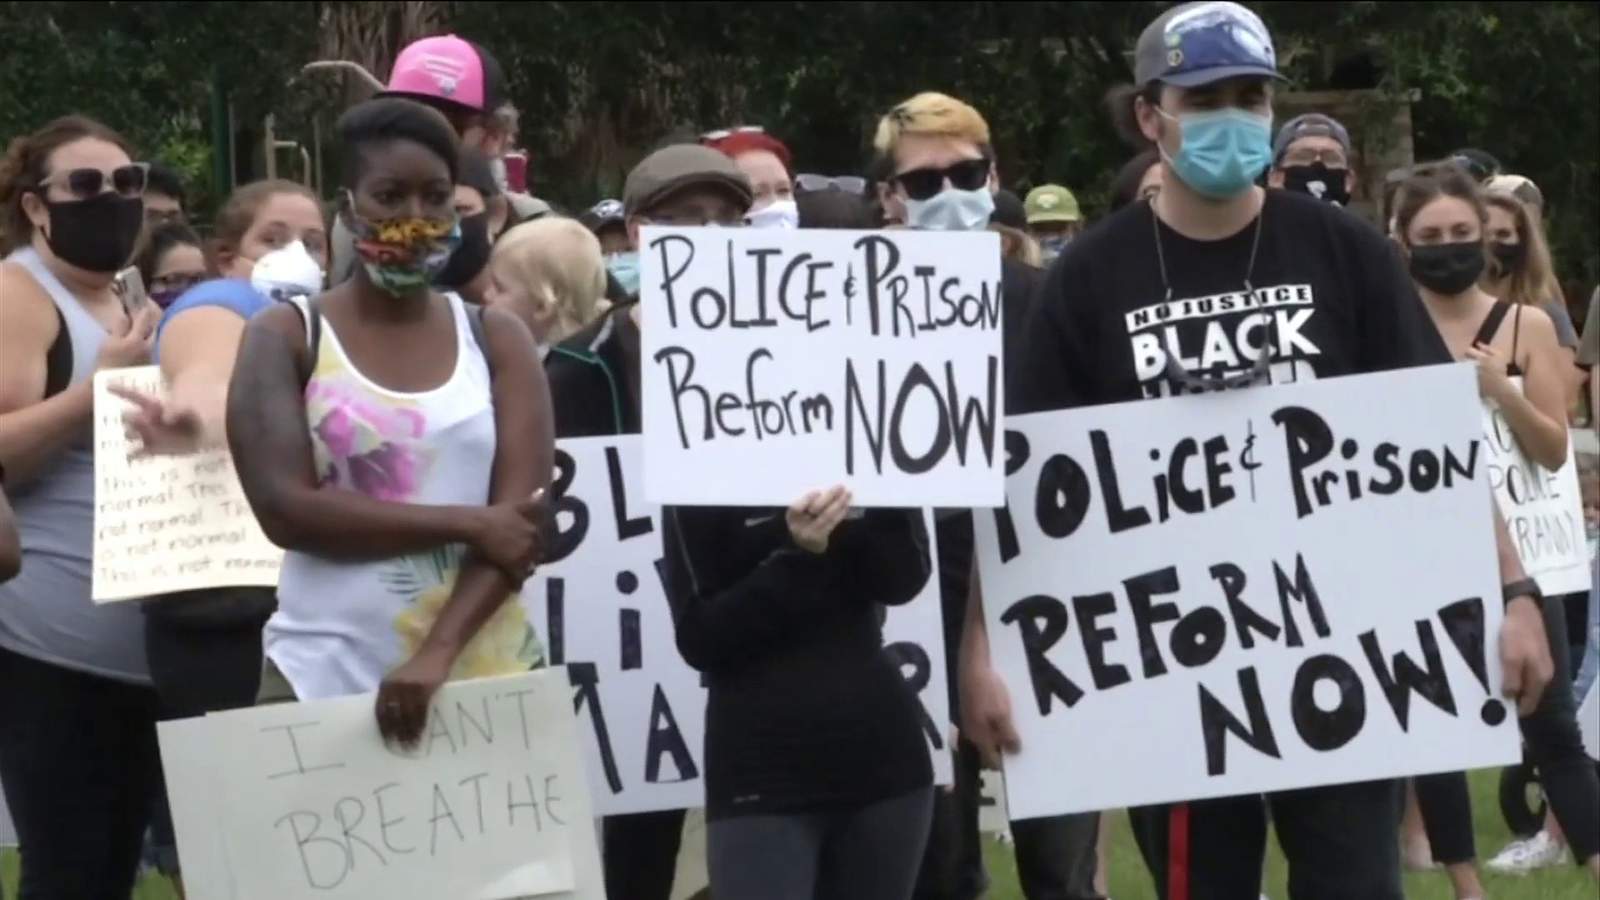 Protests renew calls for justice for Northeast Florida families